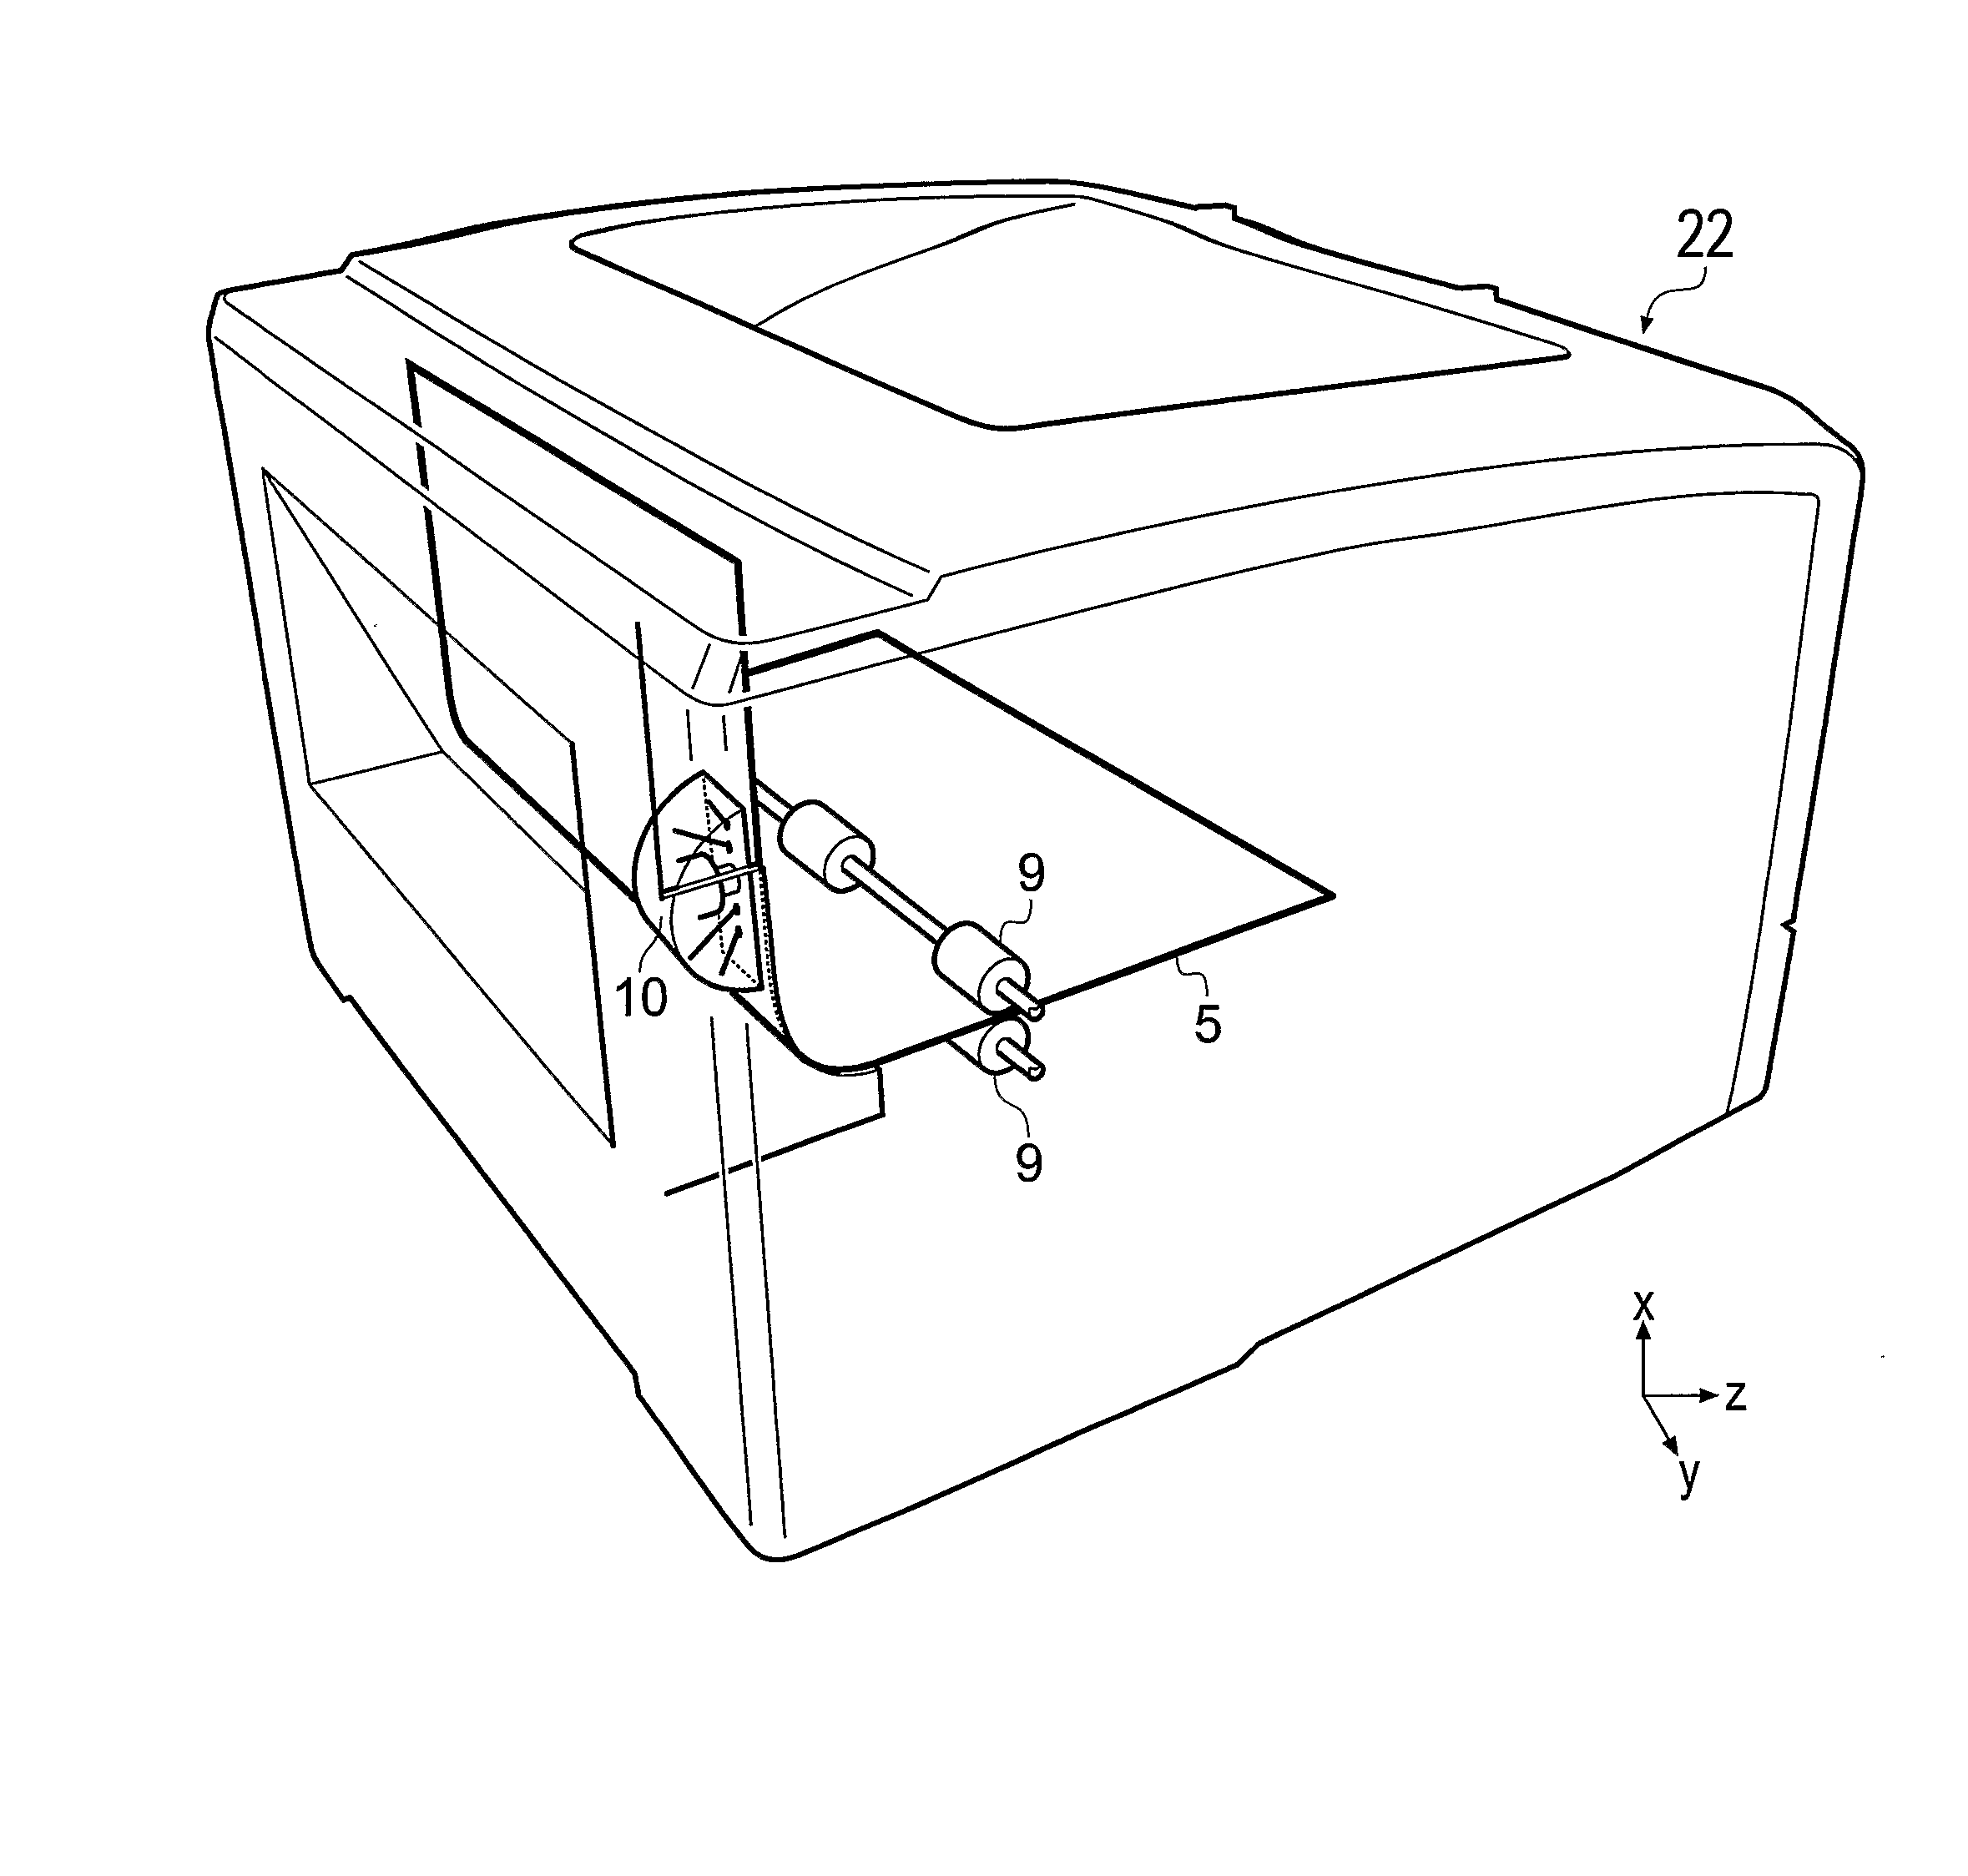 Methods and Apparatuses for Creating Authenticatable Printed Articles and Subsequently Verifying Them